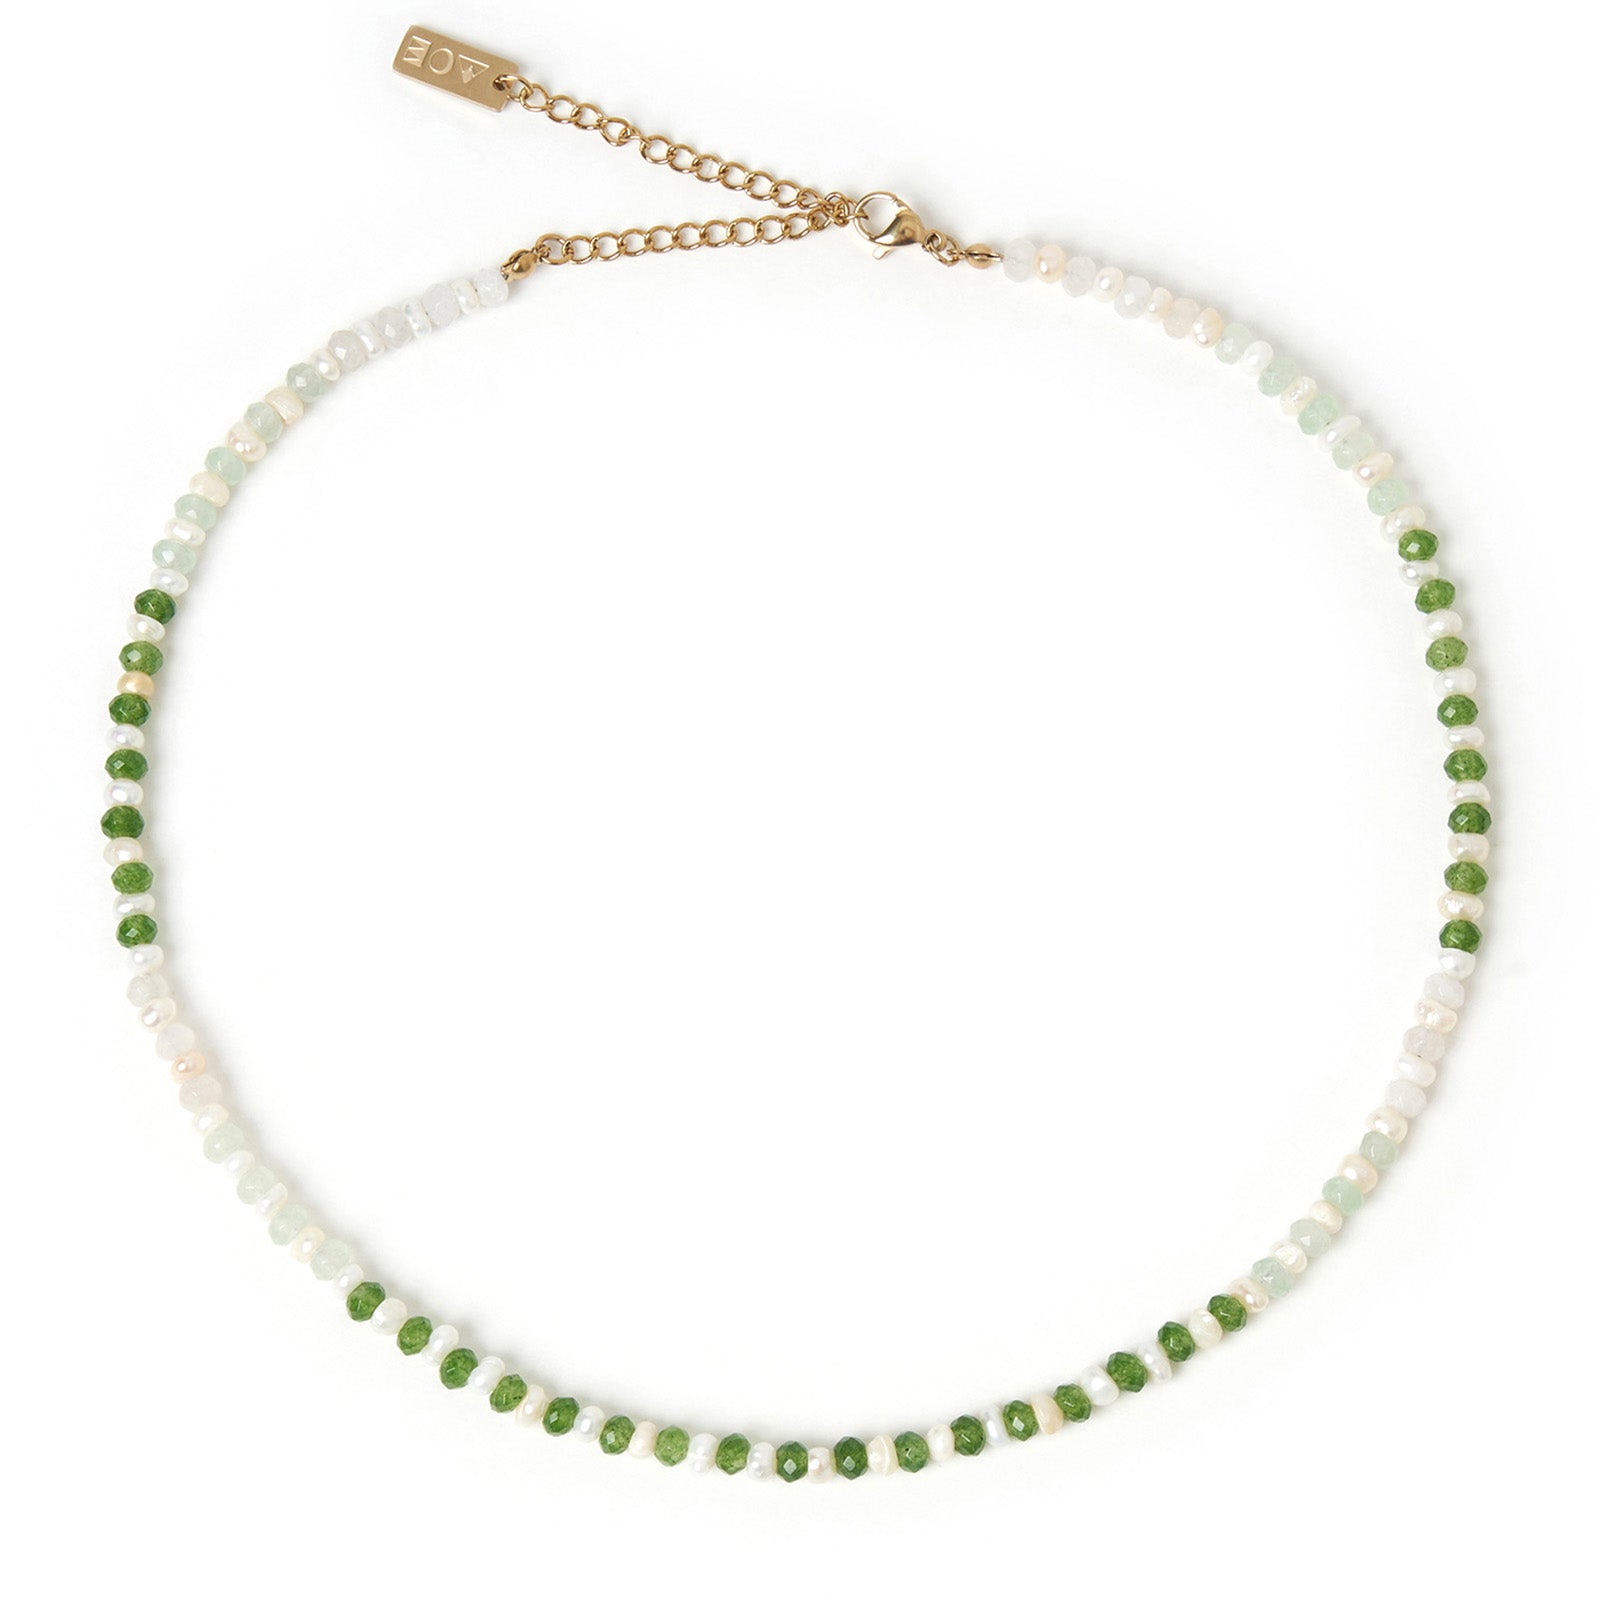 Bloom Pearl and Gemstone Necklace - Moss